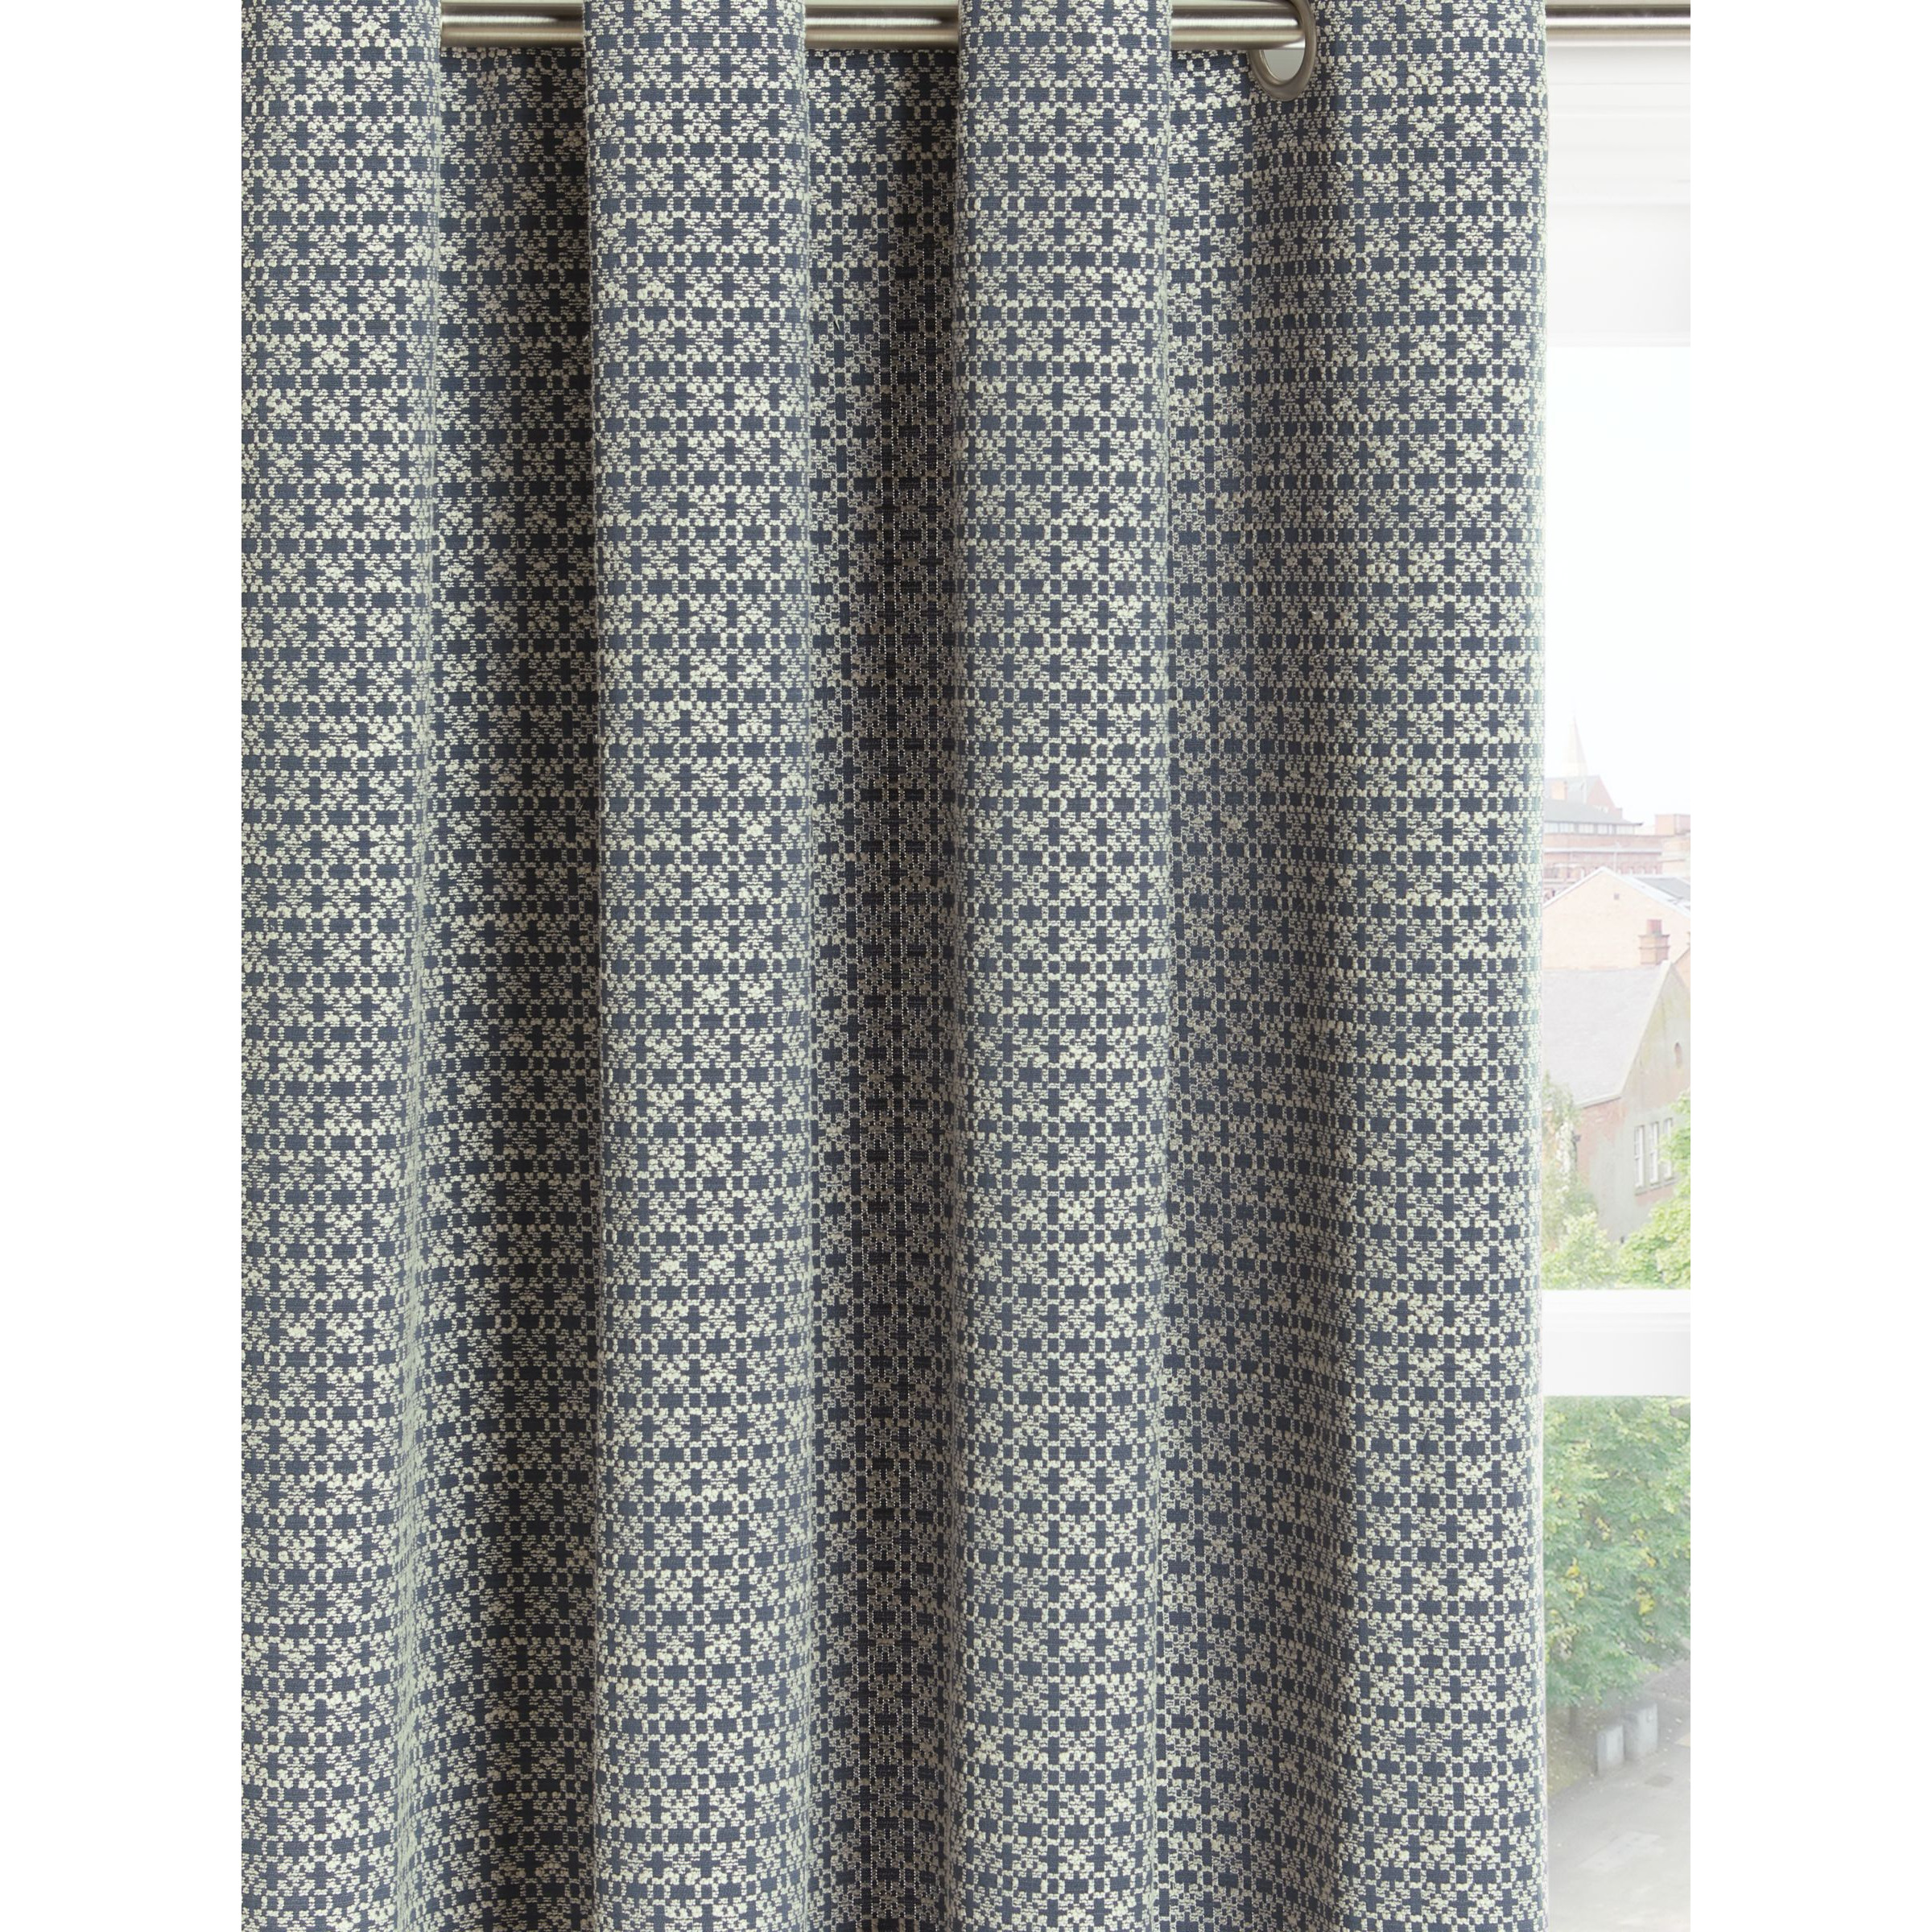 John Lewis Rona Weave Pair Lined Eyelet Curtains, Loch Blue - image 1